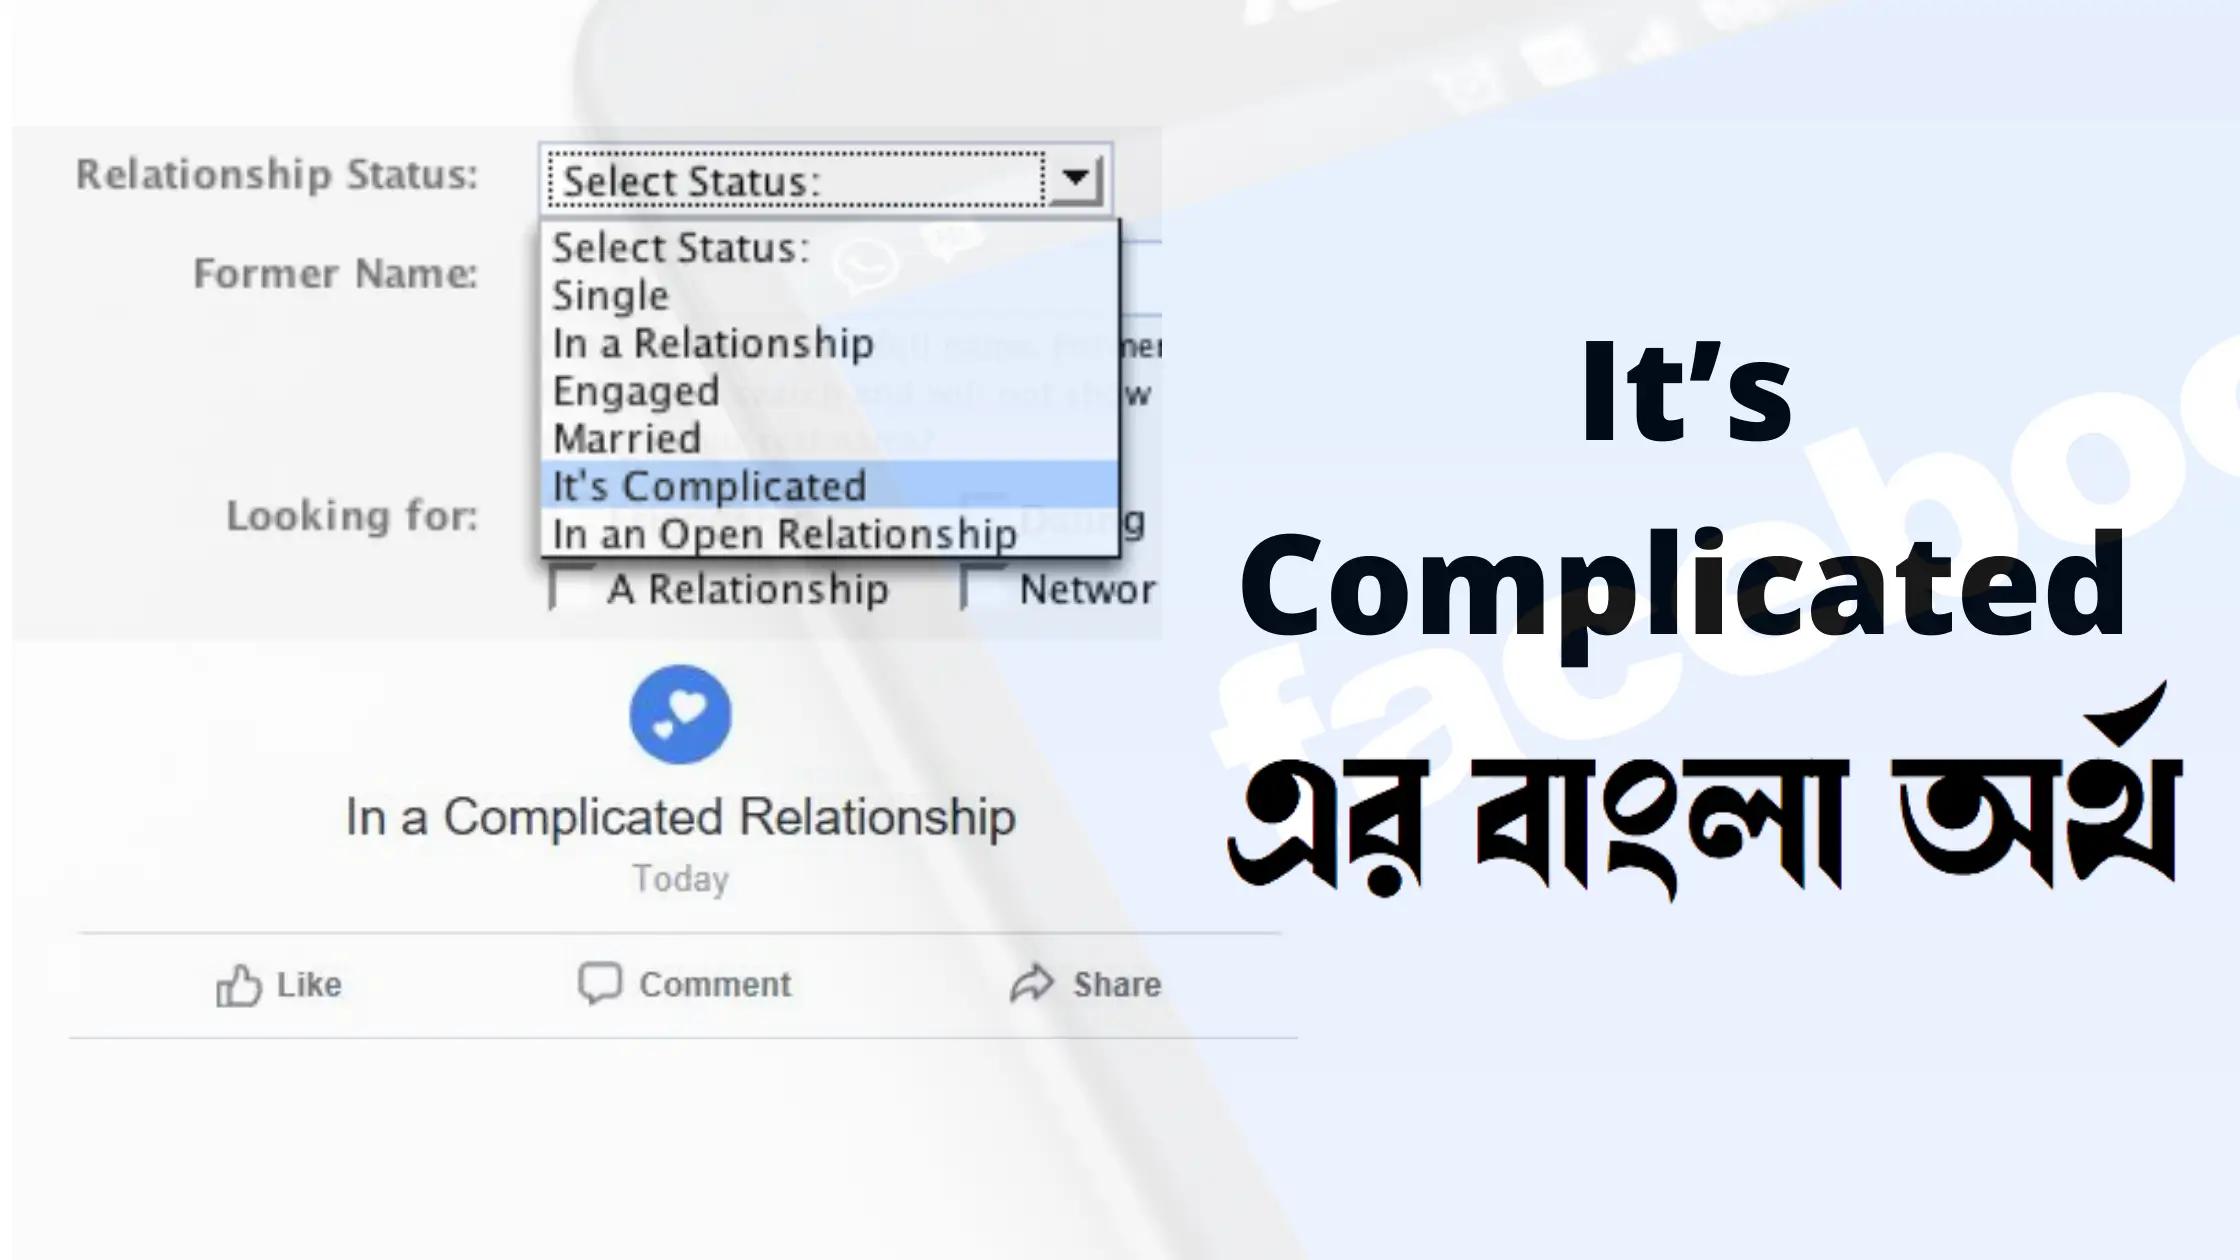 It’s Complicated meaning in Bengali